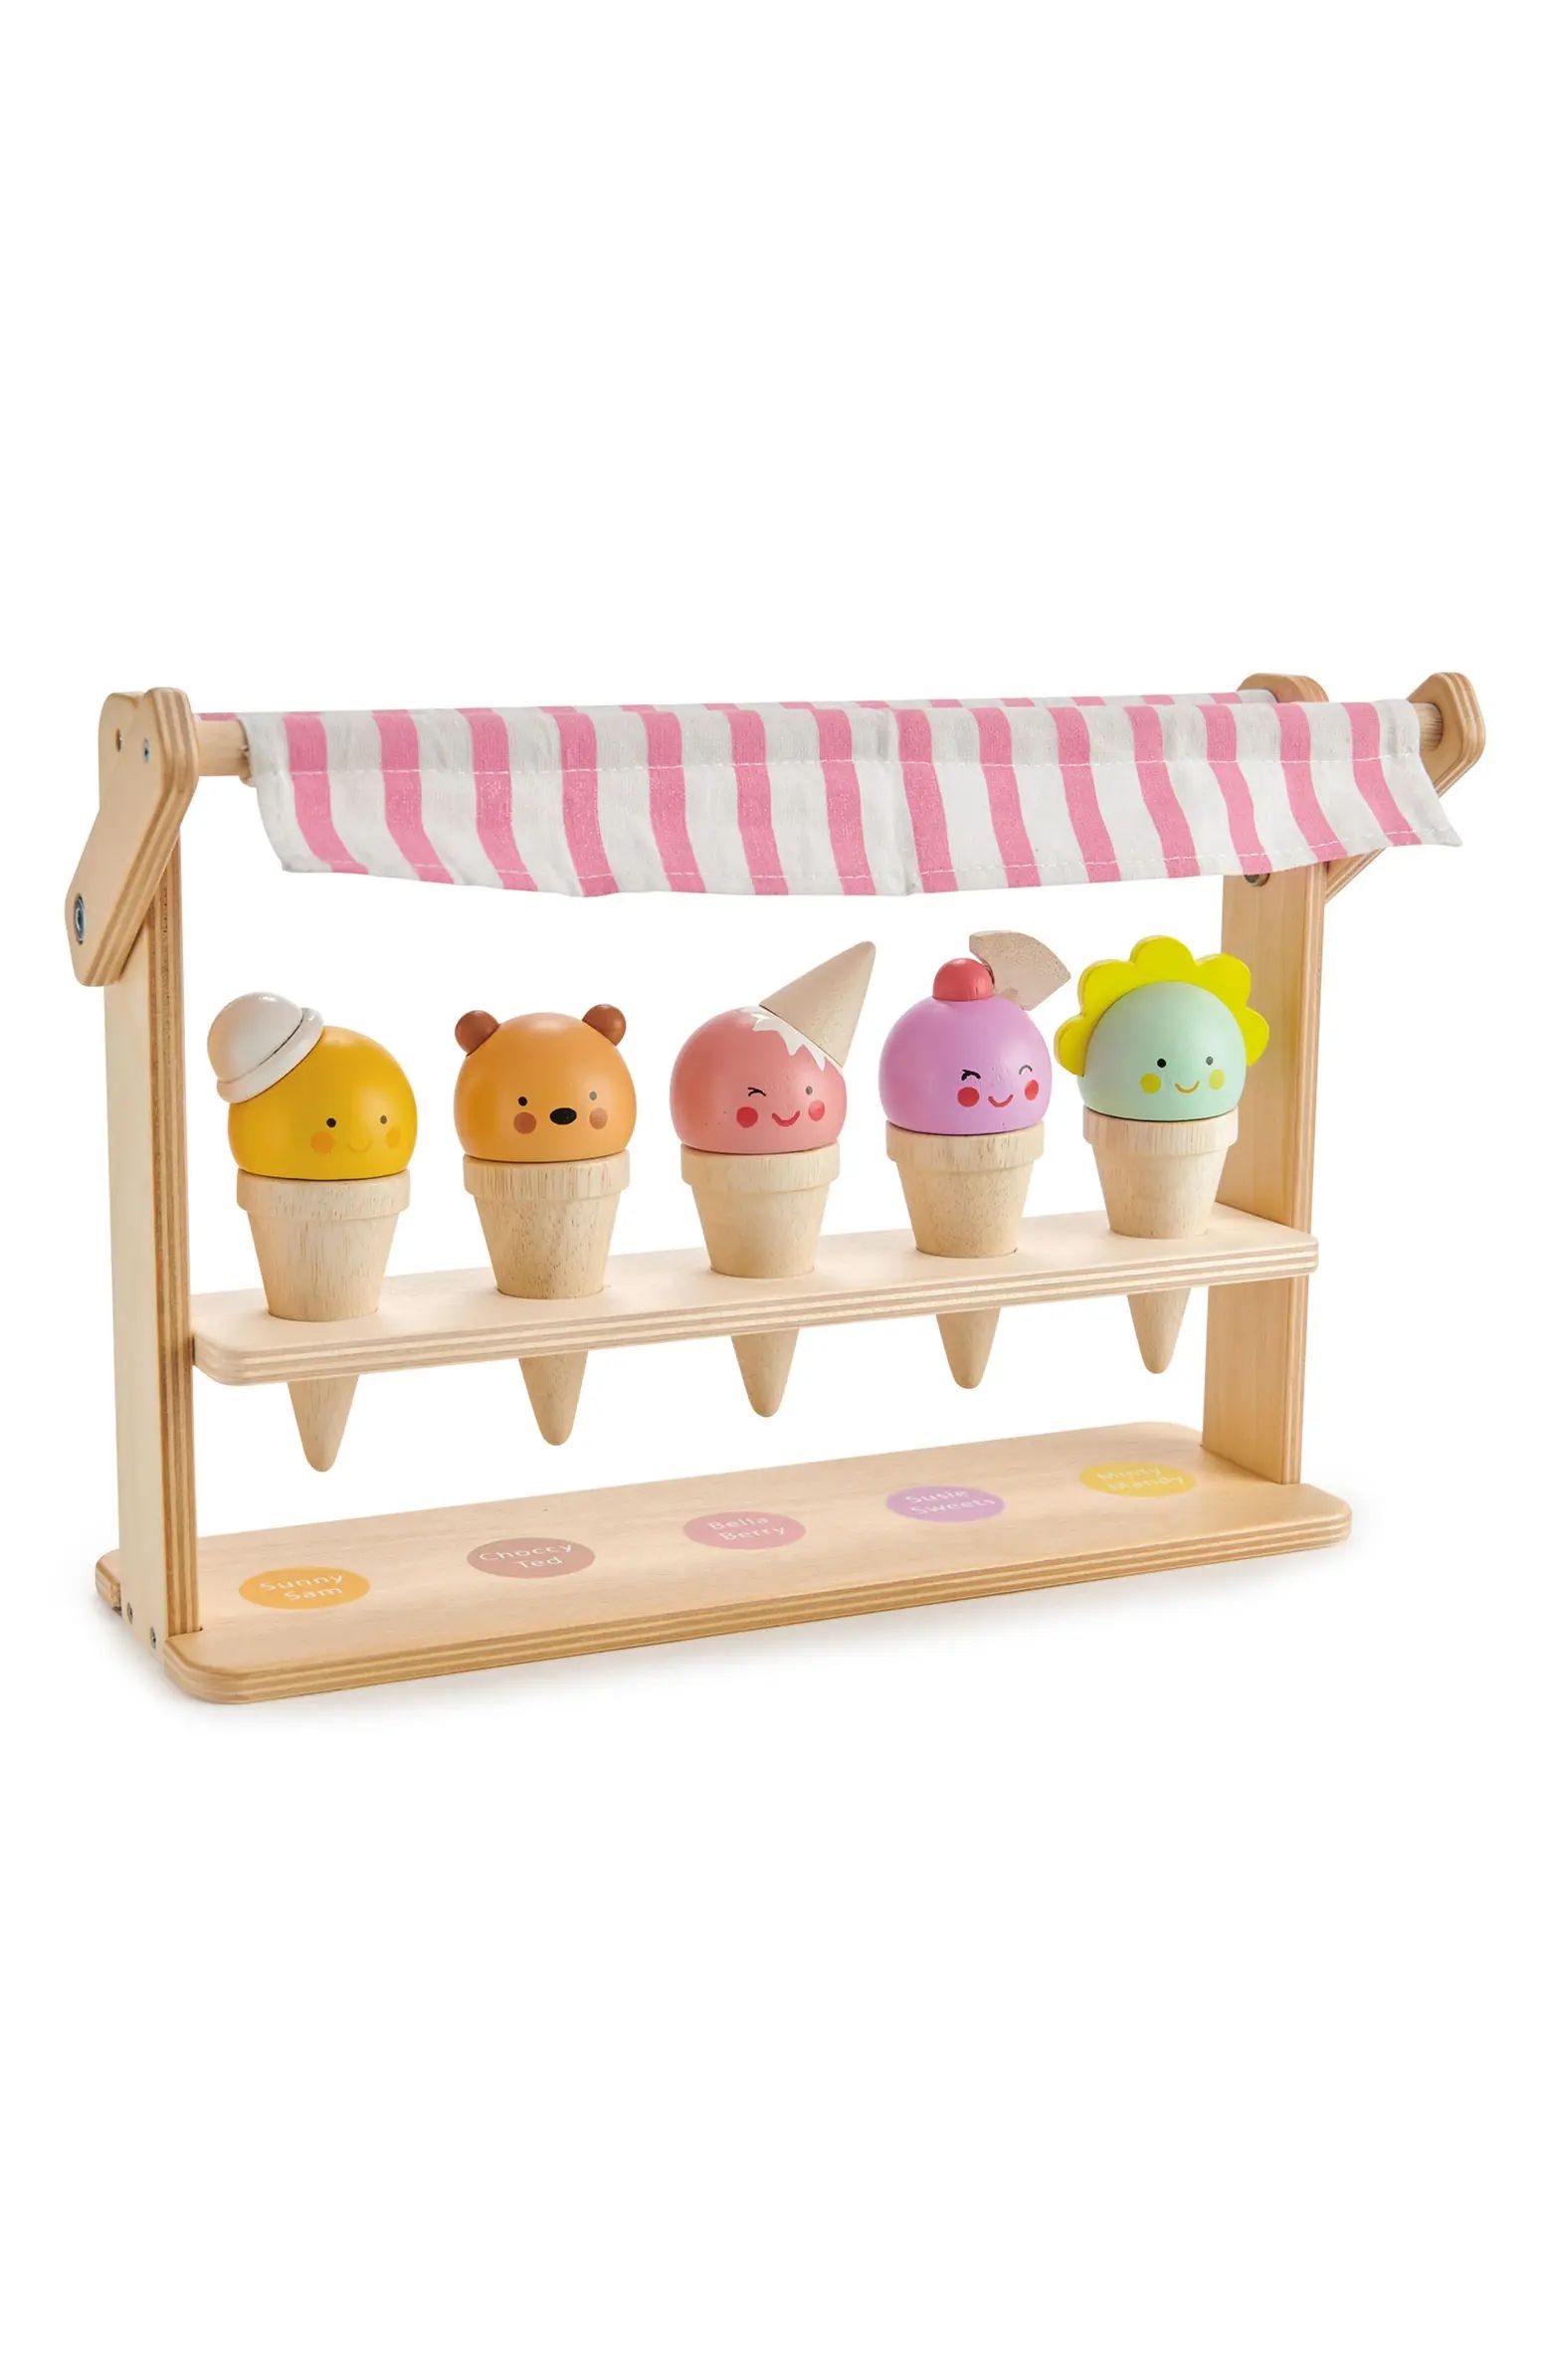 Tender Leaf Toys Scoops & Smiles Ice Cream Cone Stand Set | Nordstrom | Nordstrom